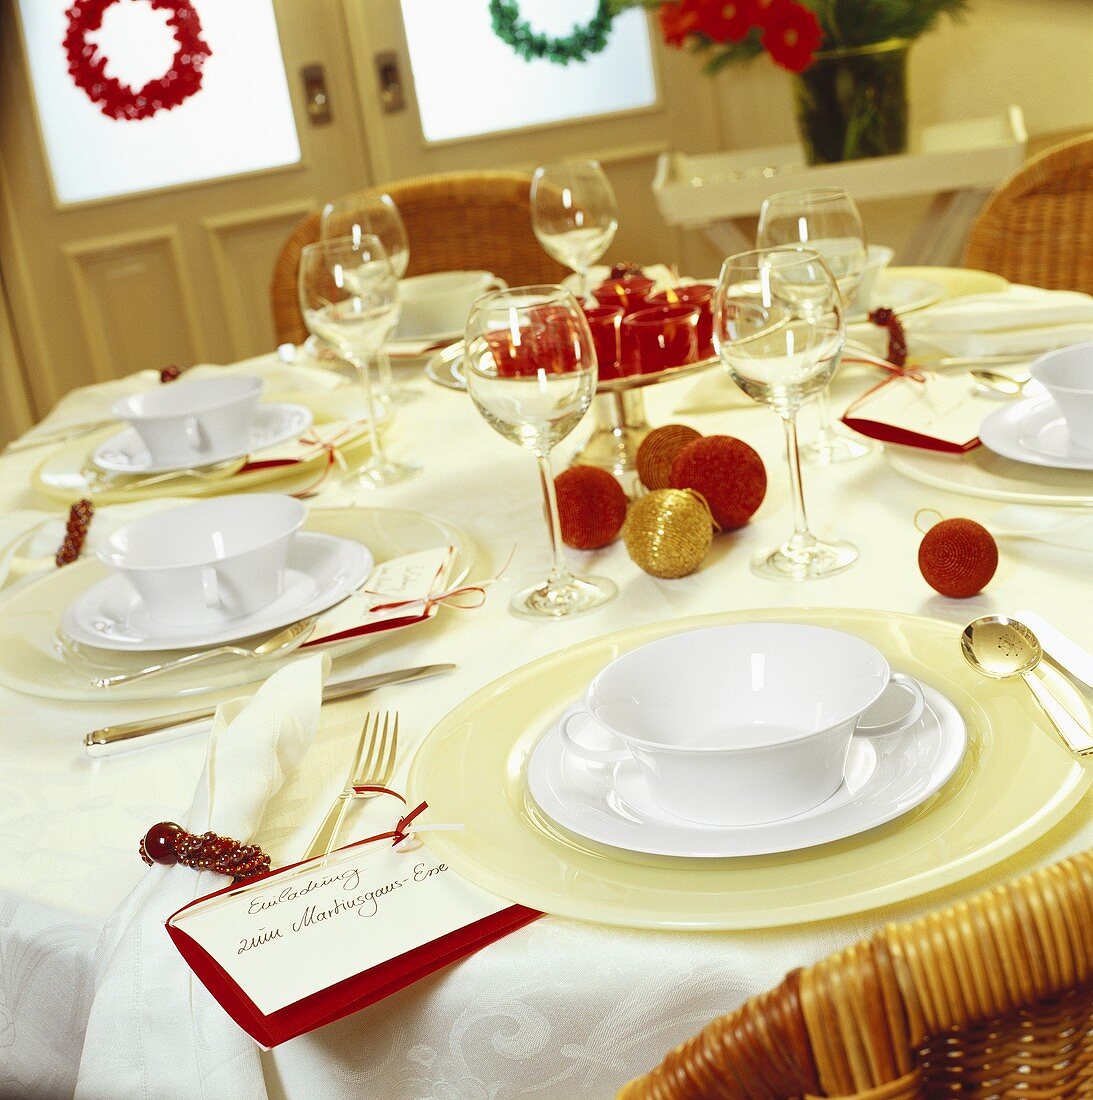 Festive table for Martinmas meal